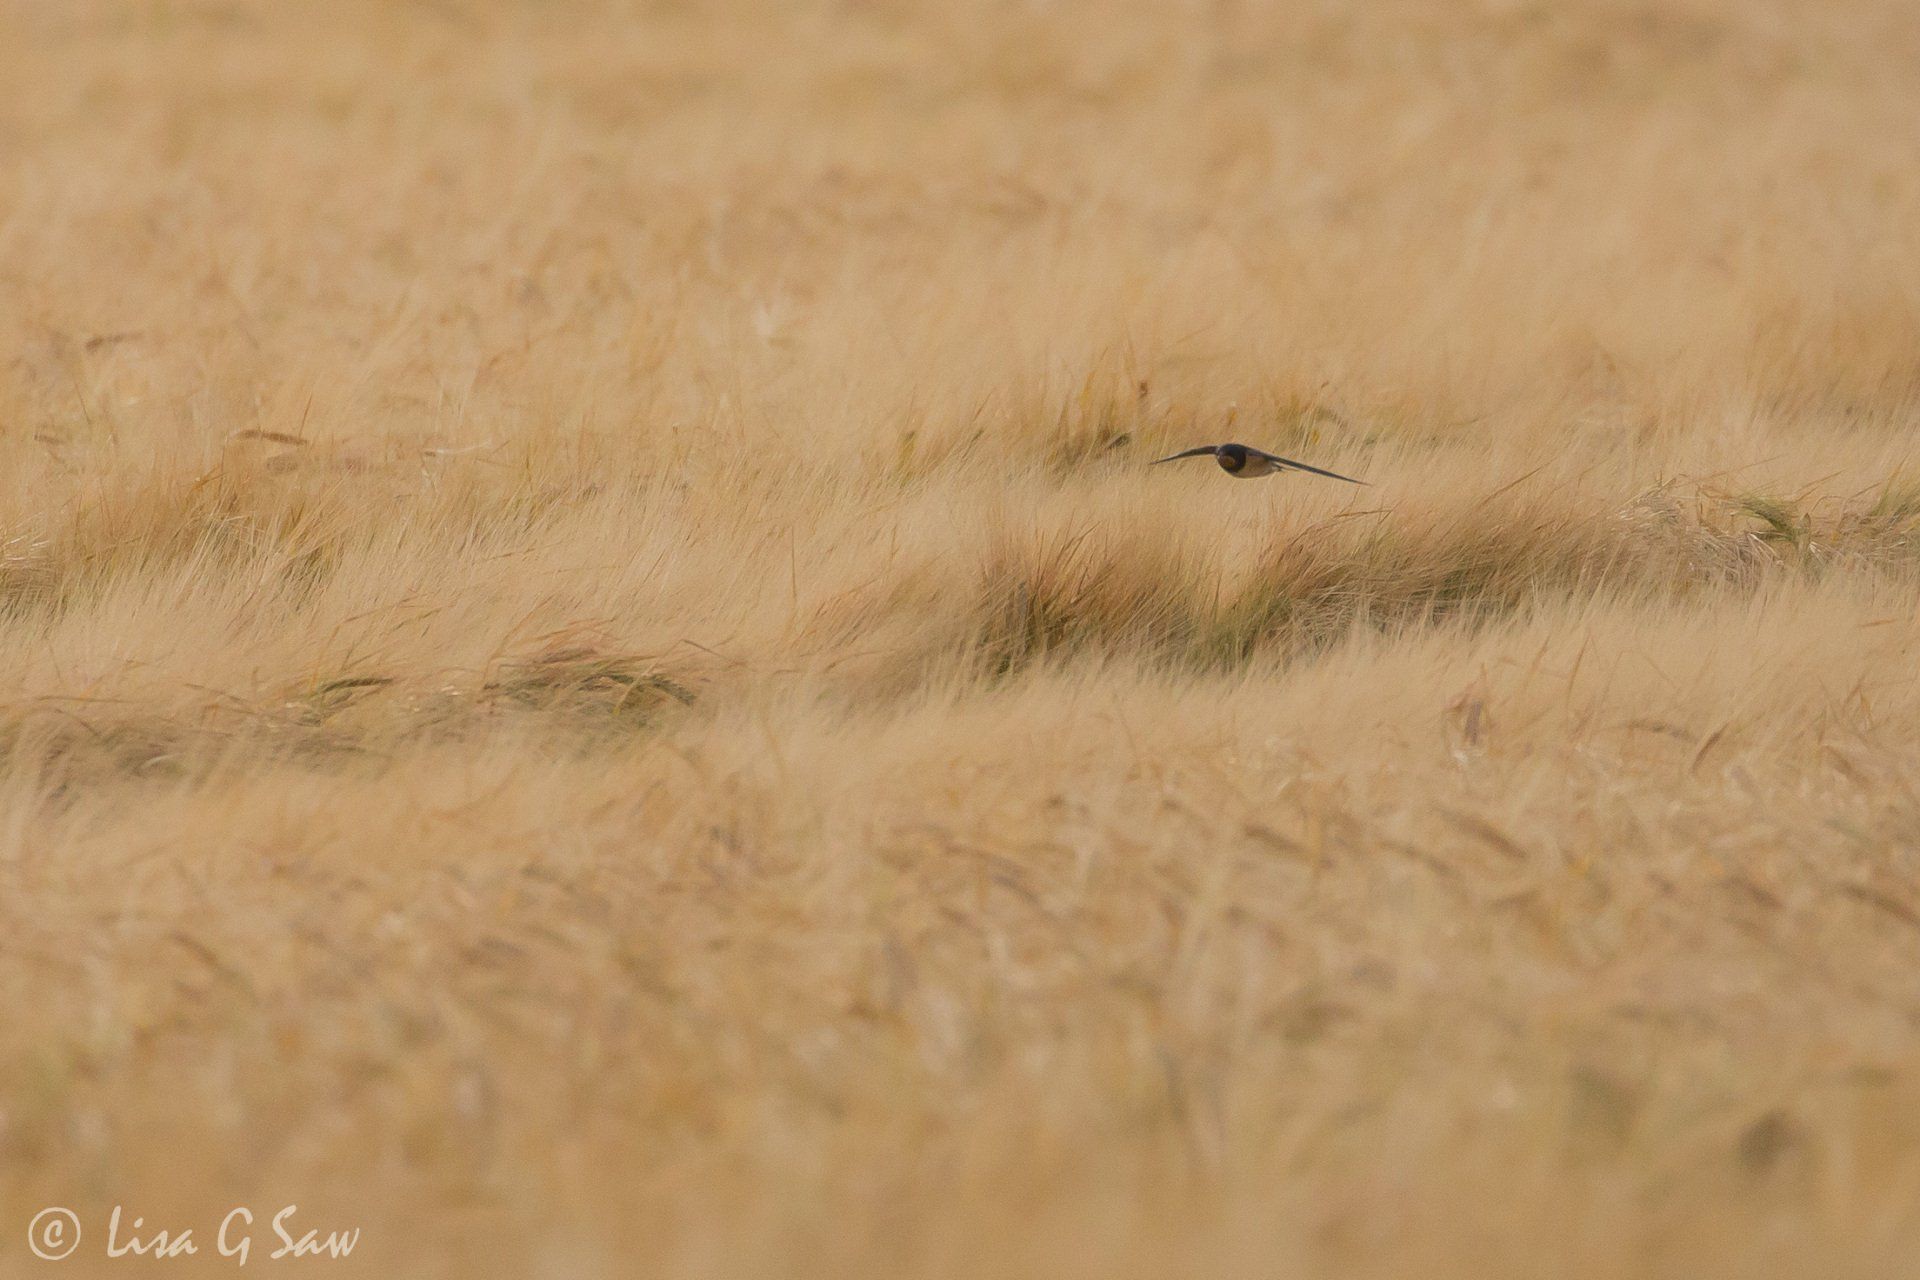 Swallow flying low over golden coloured field